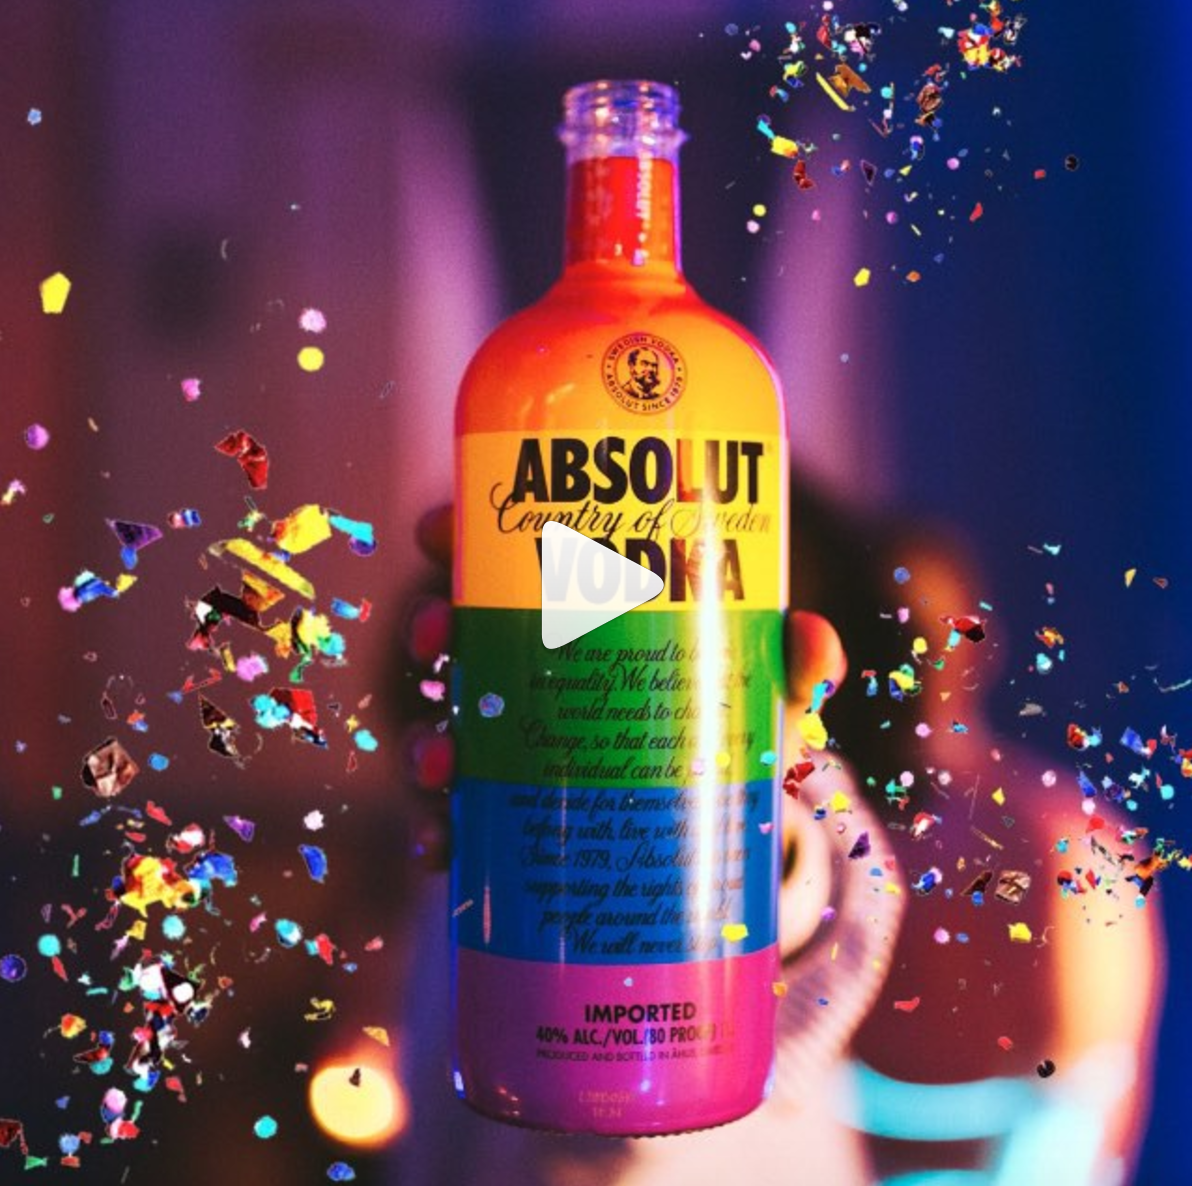 Because a lot of bravery calls for a little glitter. #NationalComingOutDay #ExpressYourPride